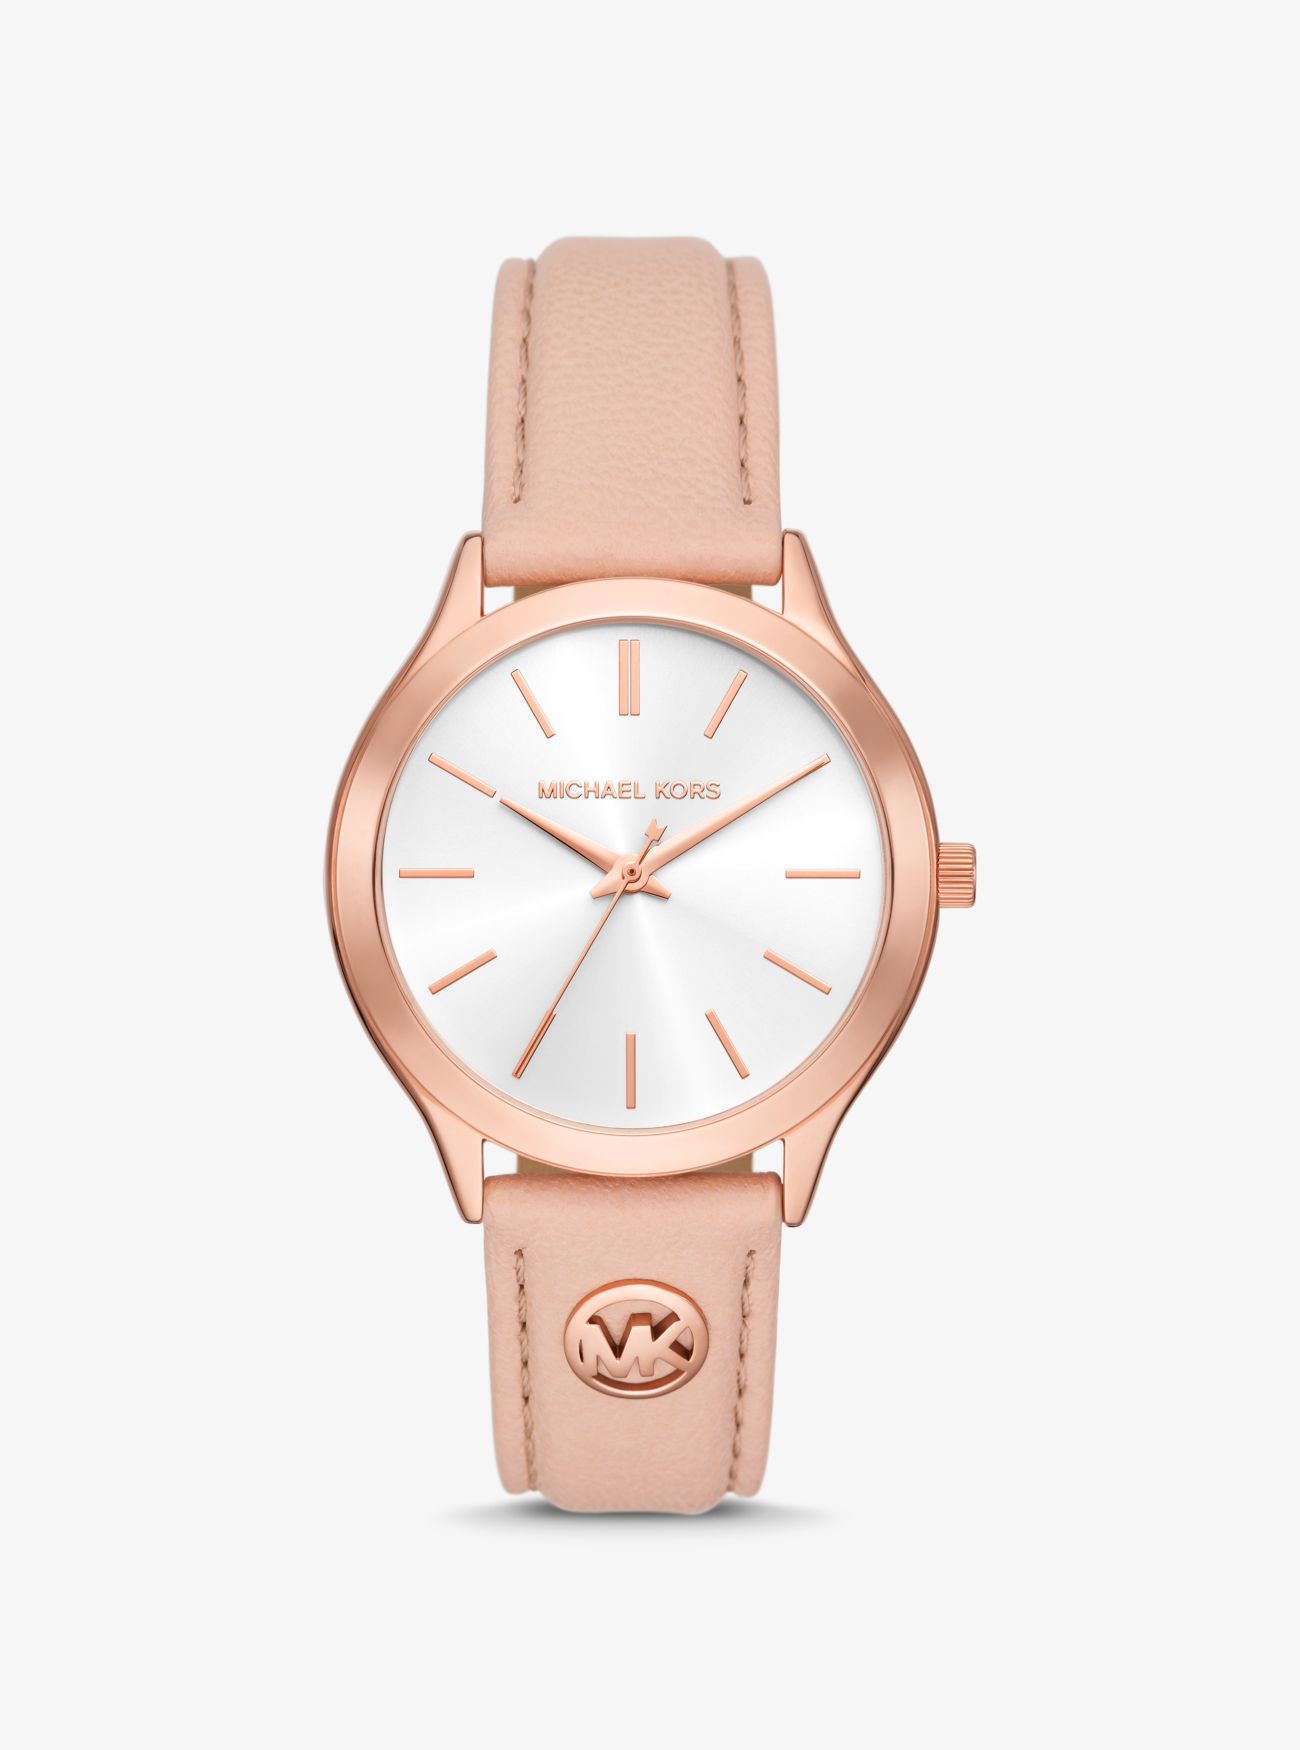 MK Slim Runway Rose Gold-Tone and Leather Watch - Pink - Michael Kors